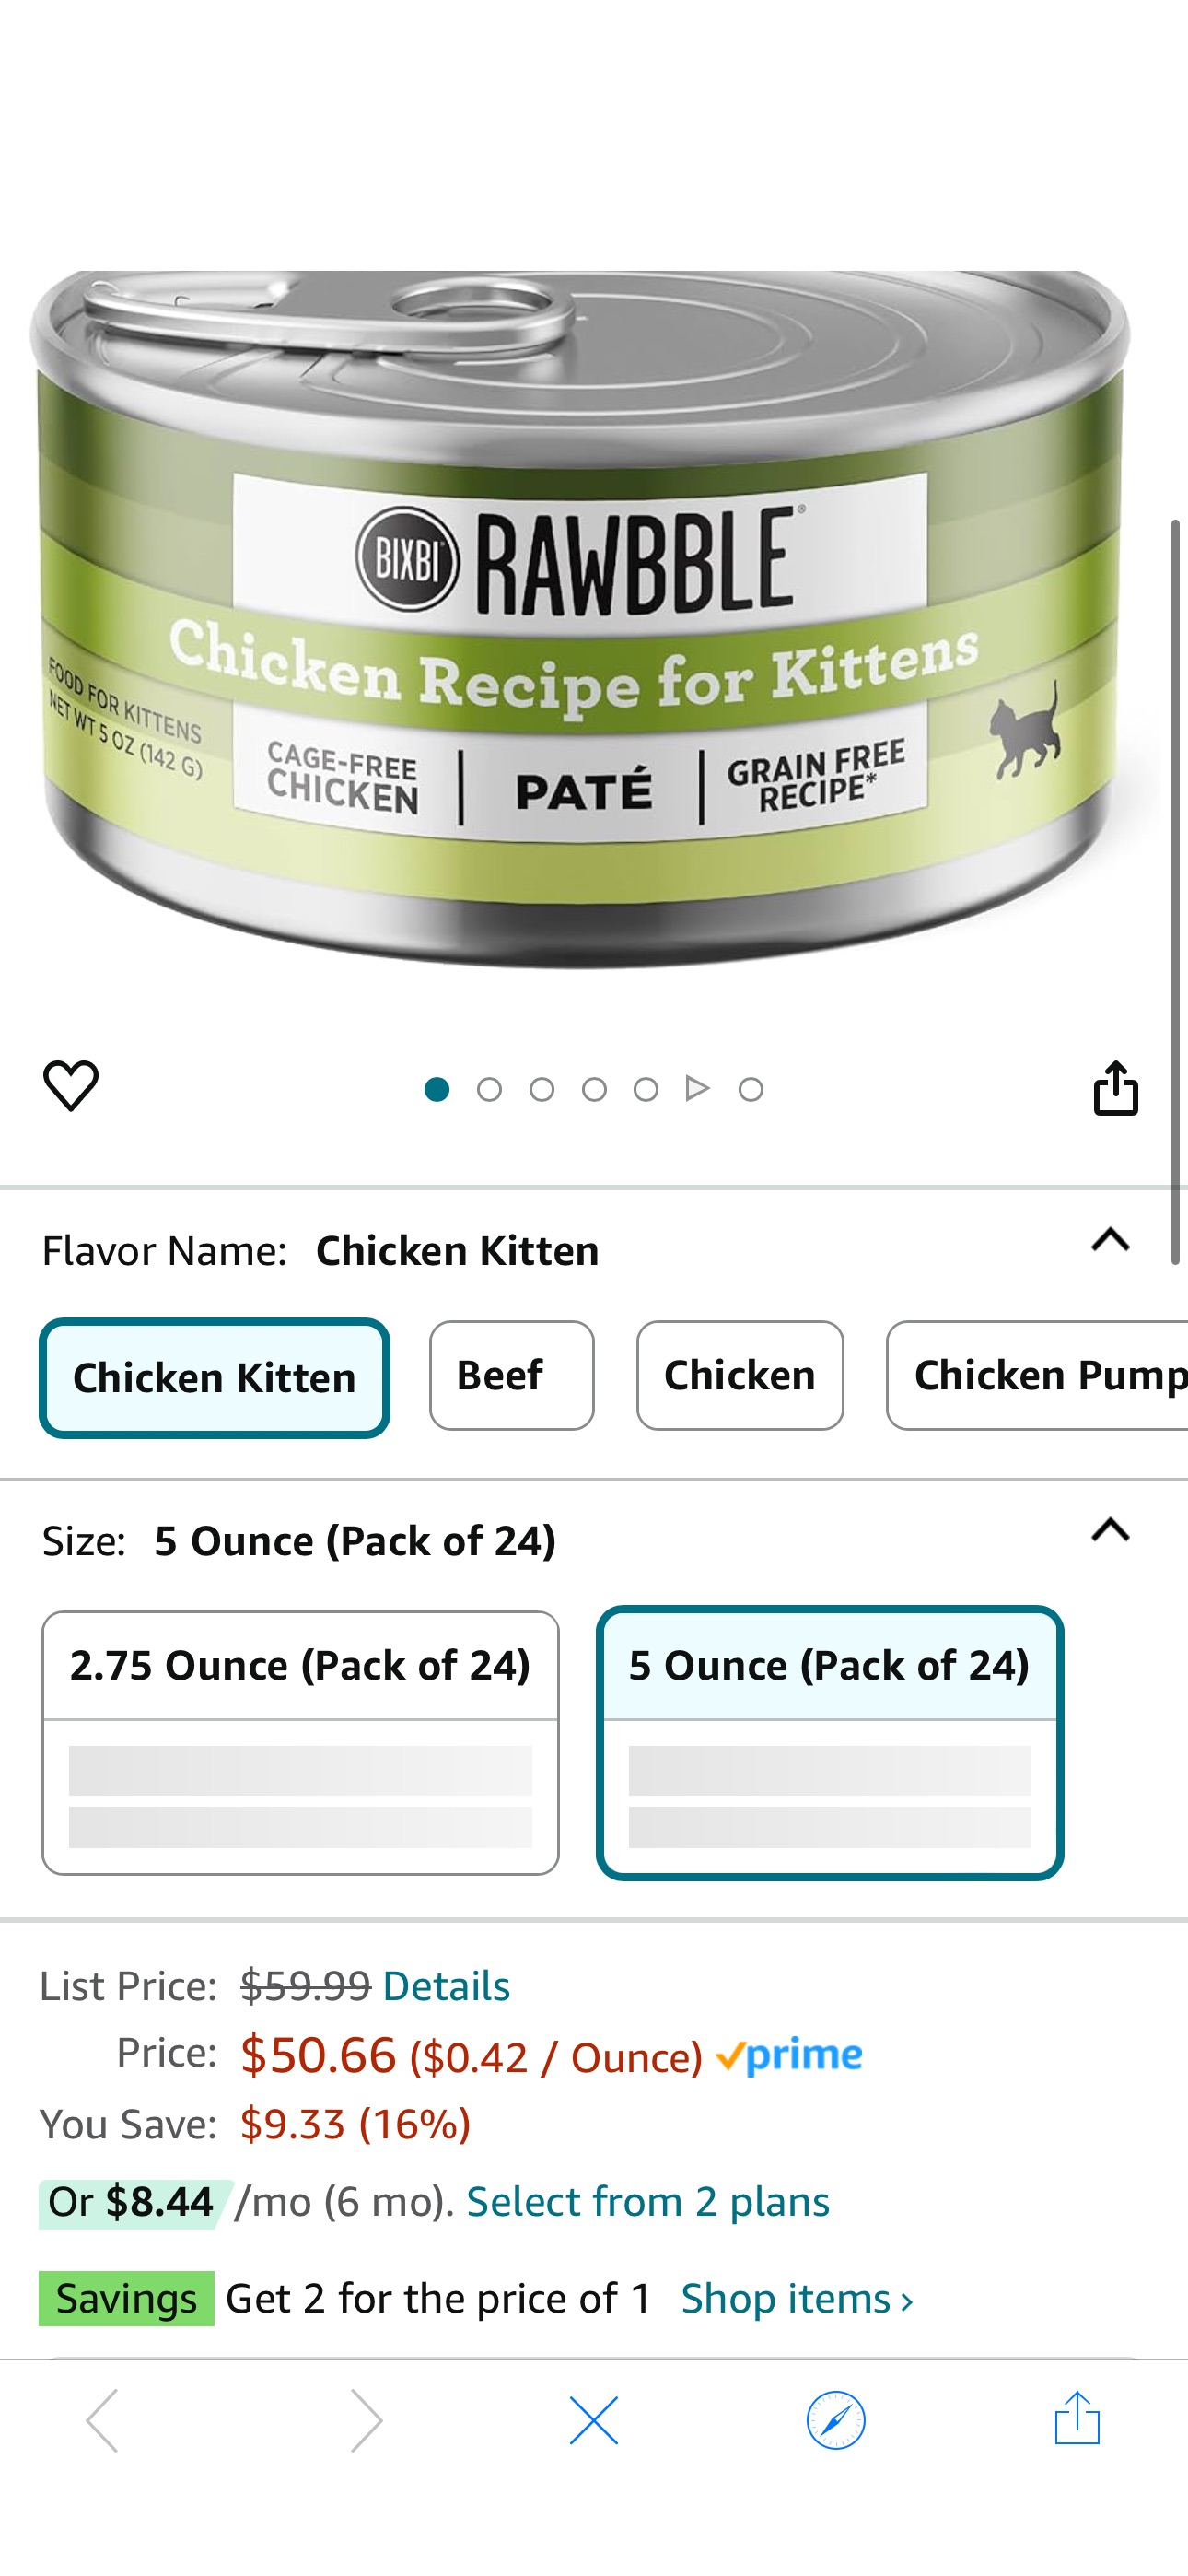 Amazon.com : BIXBI Rawbble Chicken Pate Recipe for Kittens Cans – Grain Free, Protein Rich Wet Kitten Food – (5 Ounce Cans, Case of 24) : Pet Supplies 买一送一